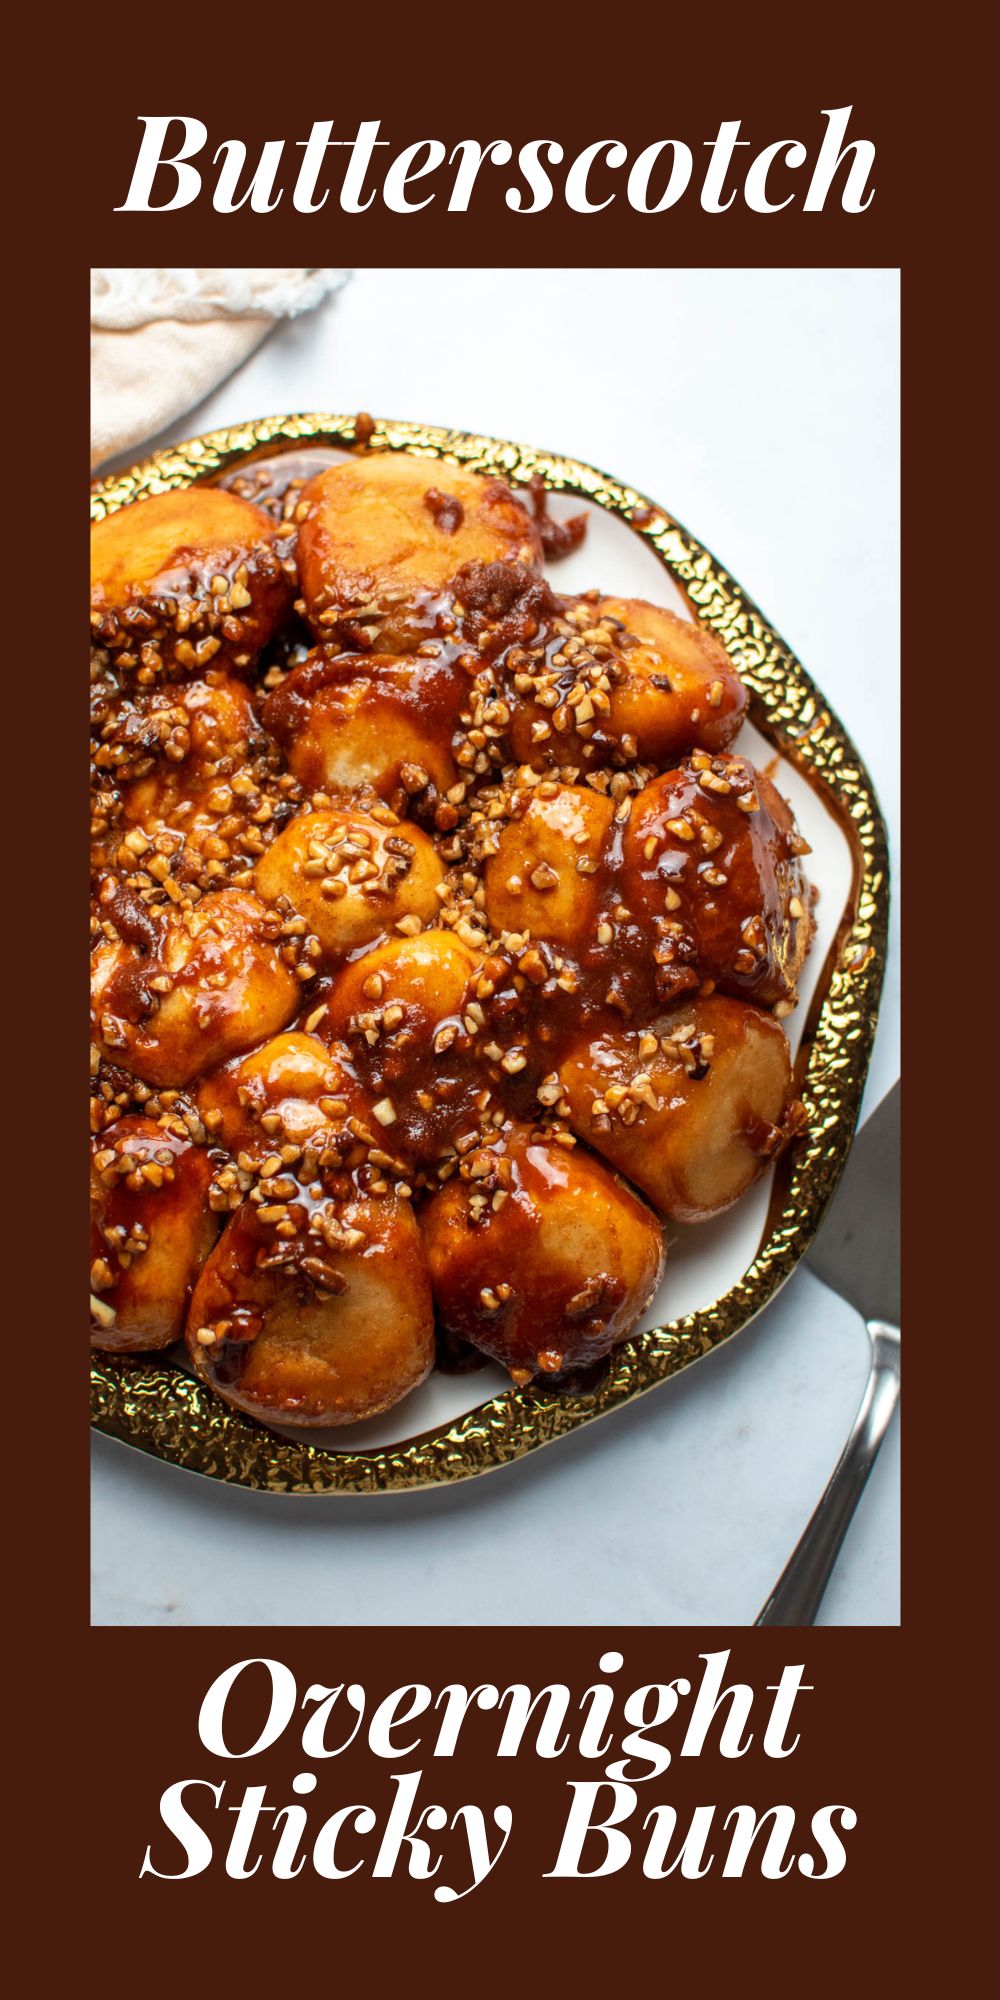 Pinterest graphic with text and photo of butterscotch overnight sticky buns on gold plate.